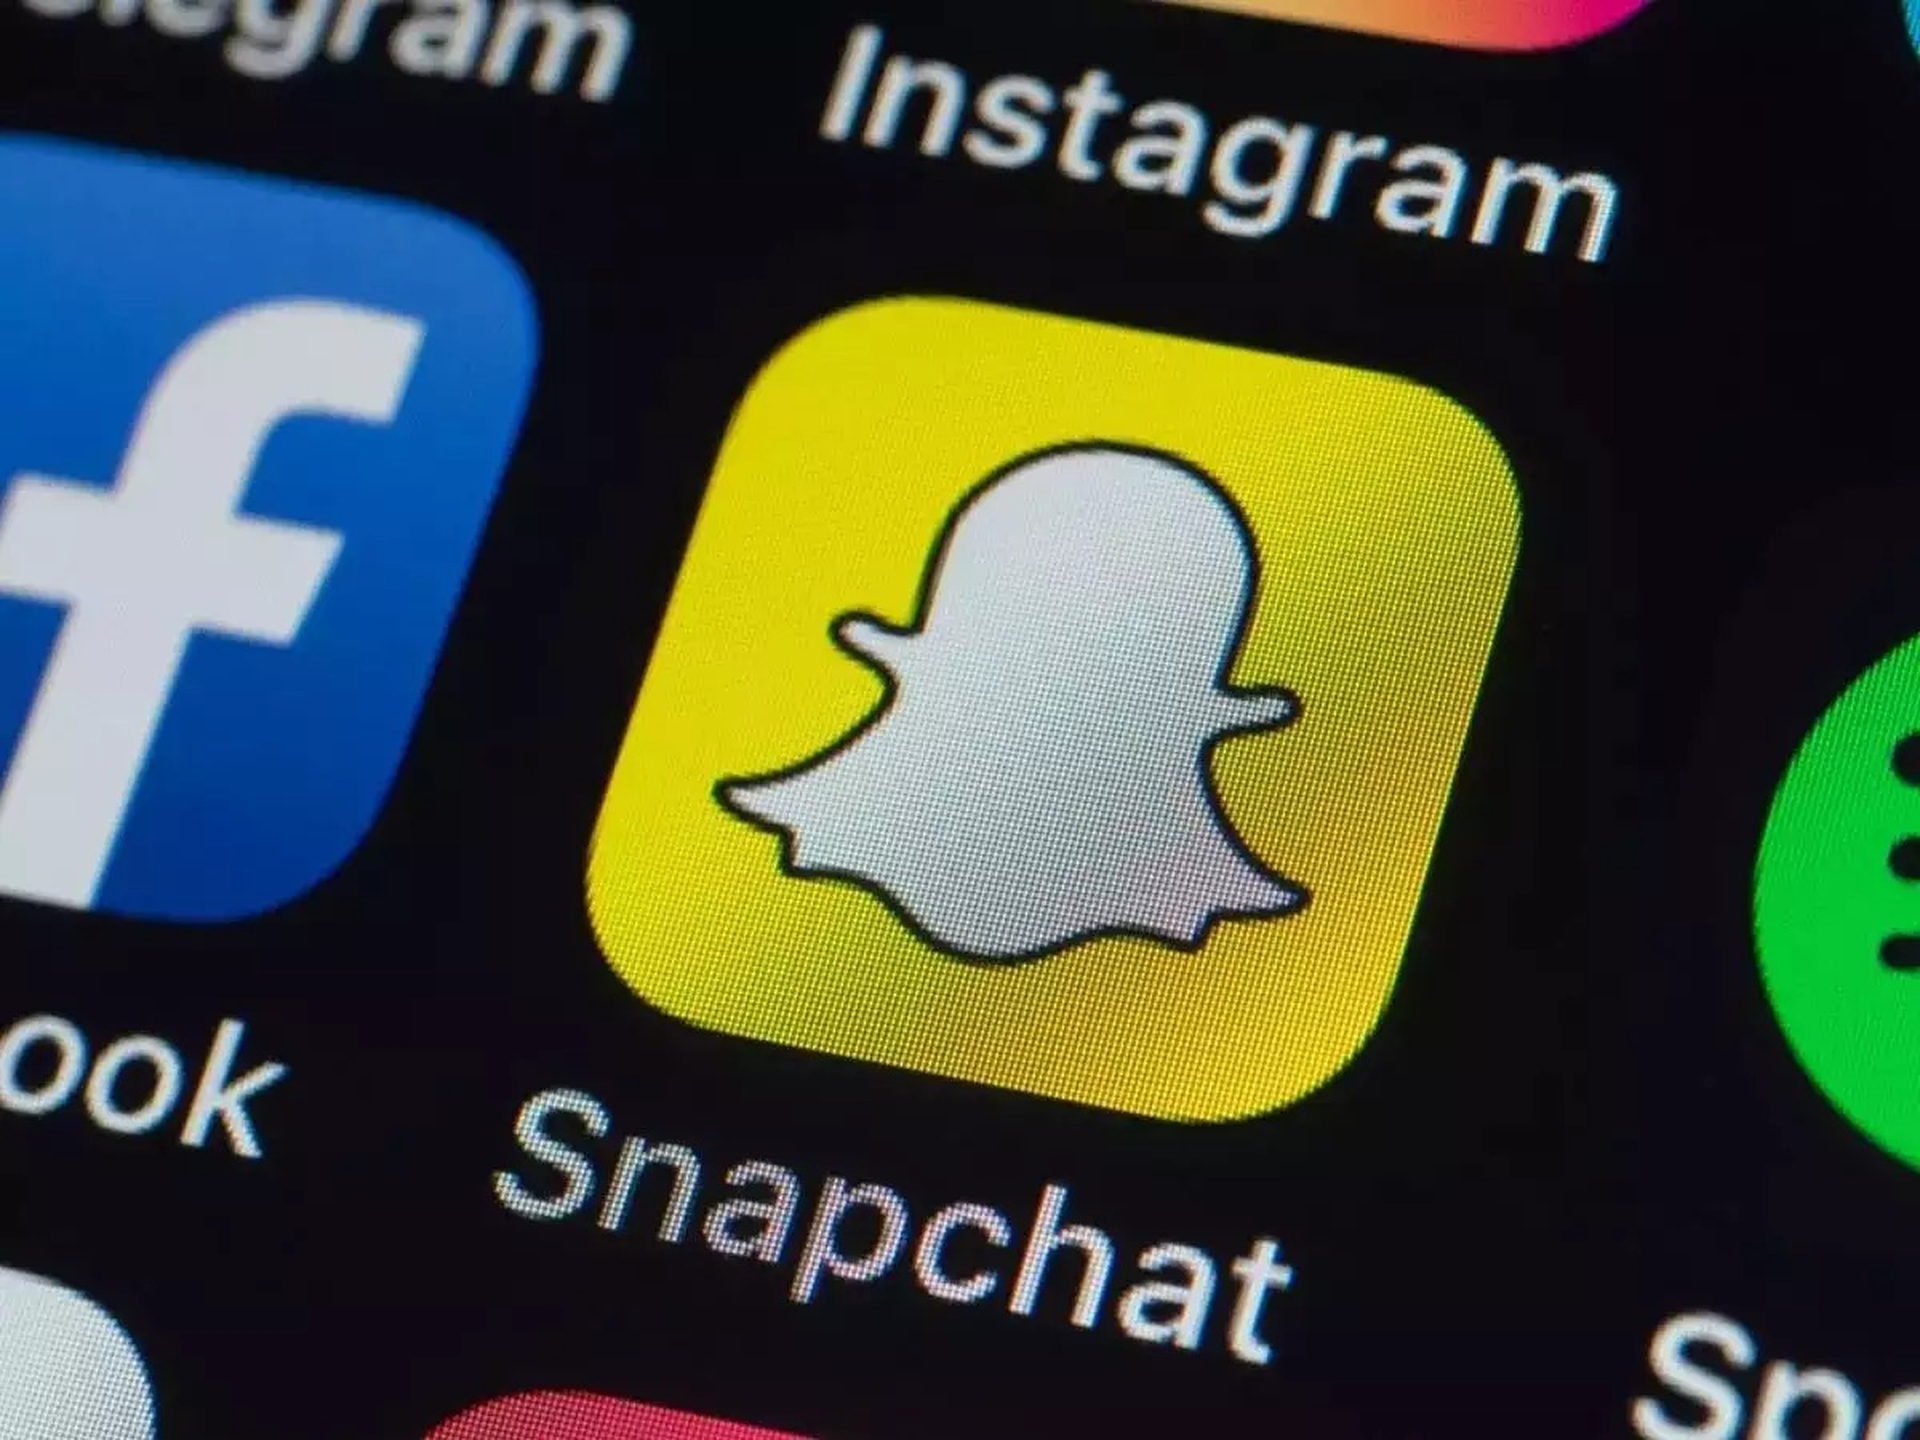 In this article, we are going to cover how to add eBay listing on Snapchat, so you can share your listings with your Snapchat connections.